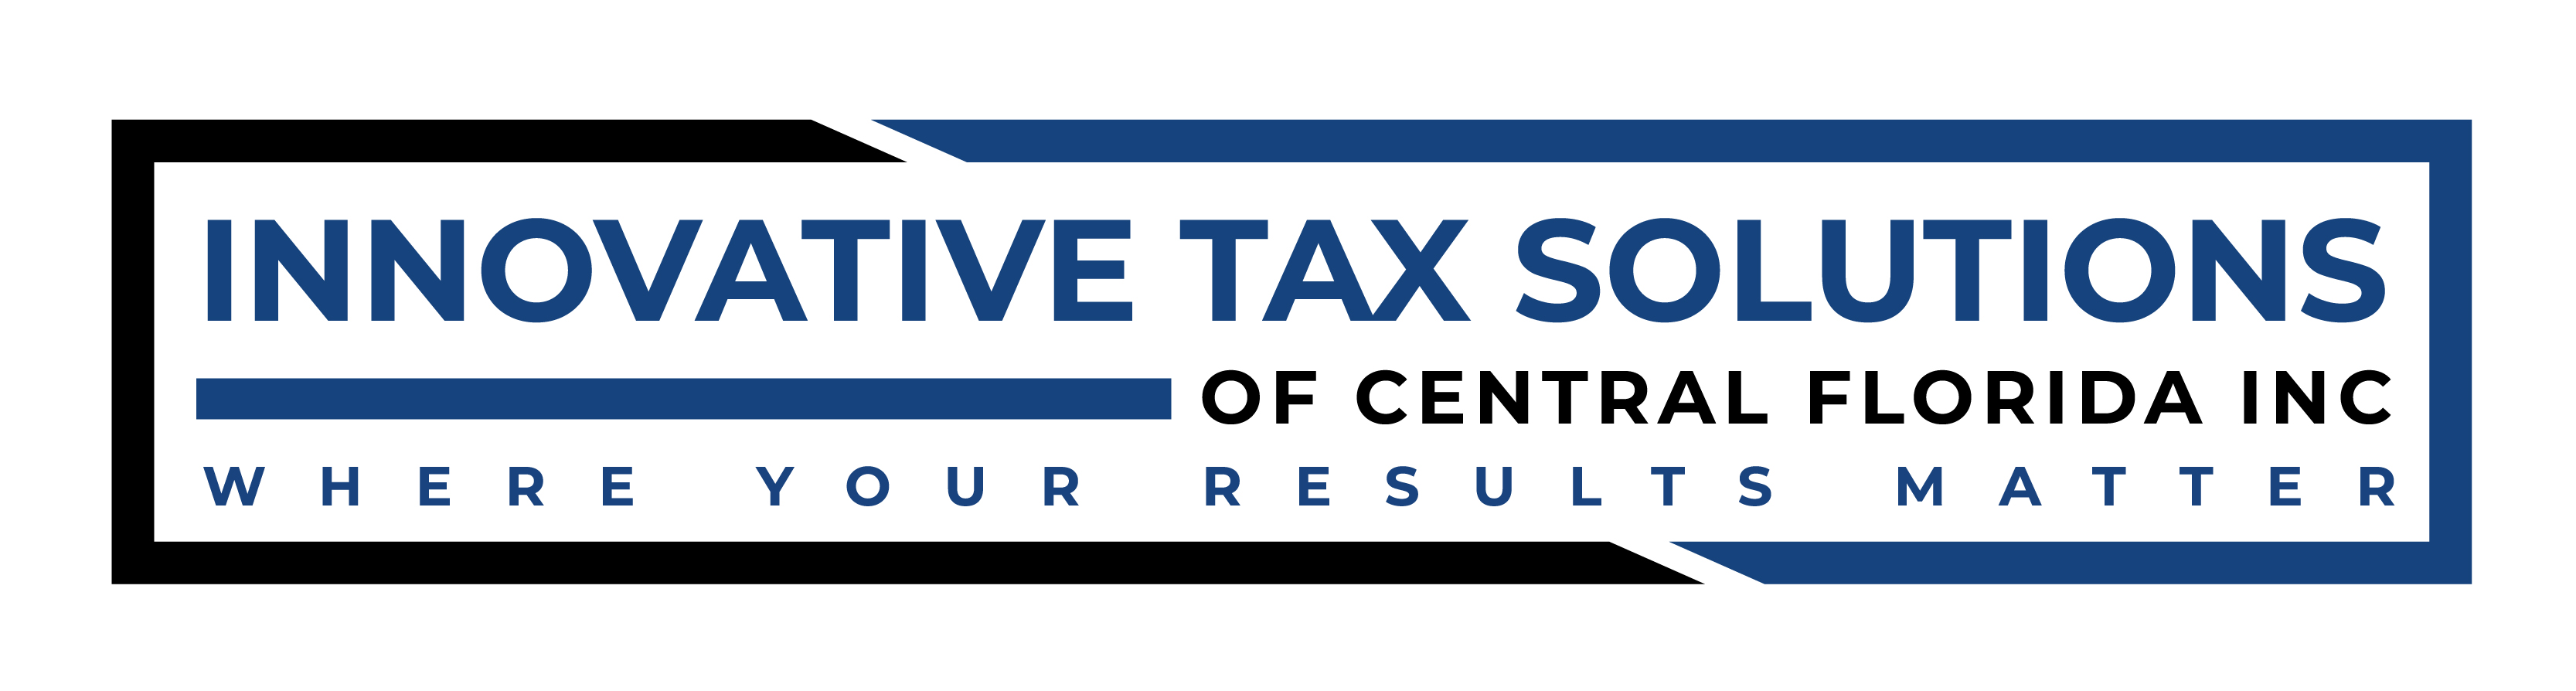 Innovative Tax Solutions of Central Florida Inc.